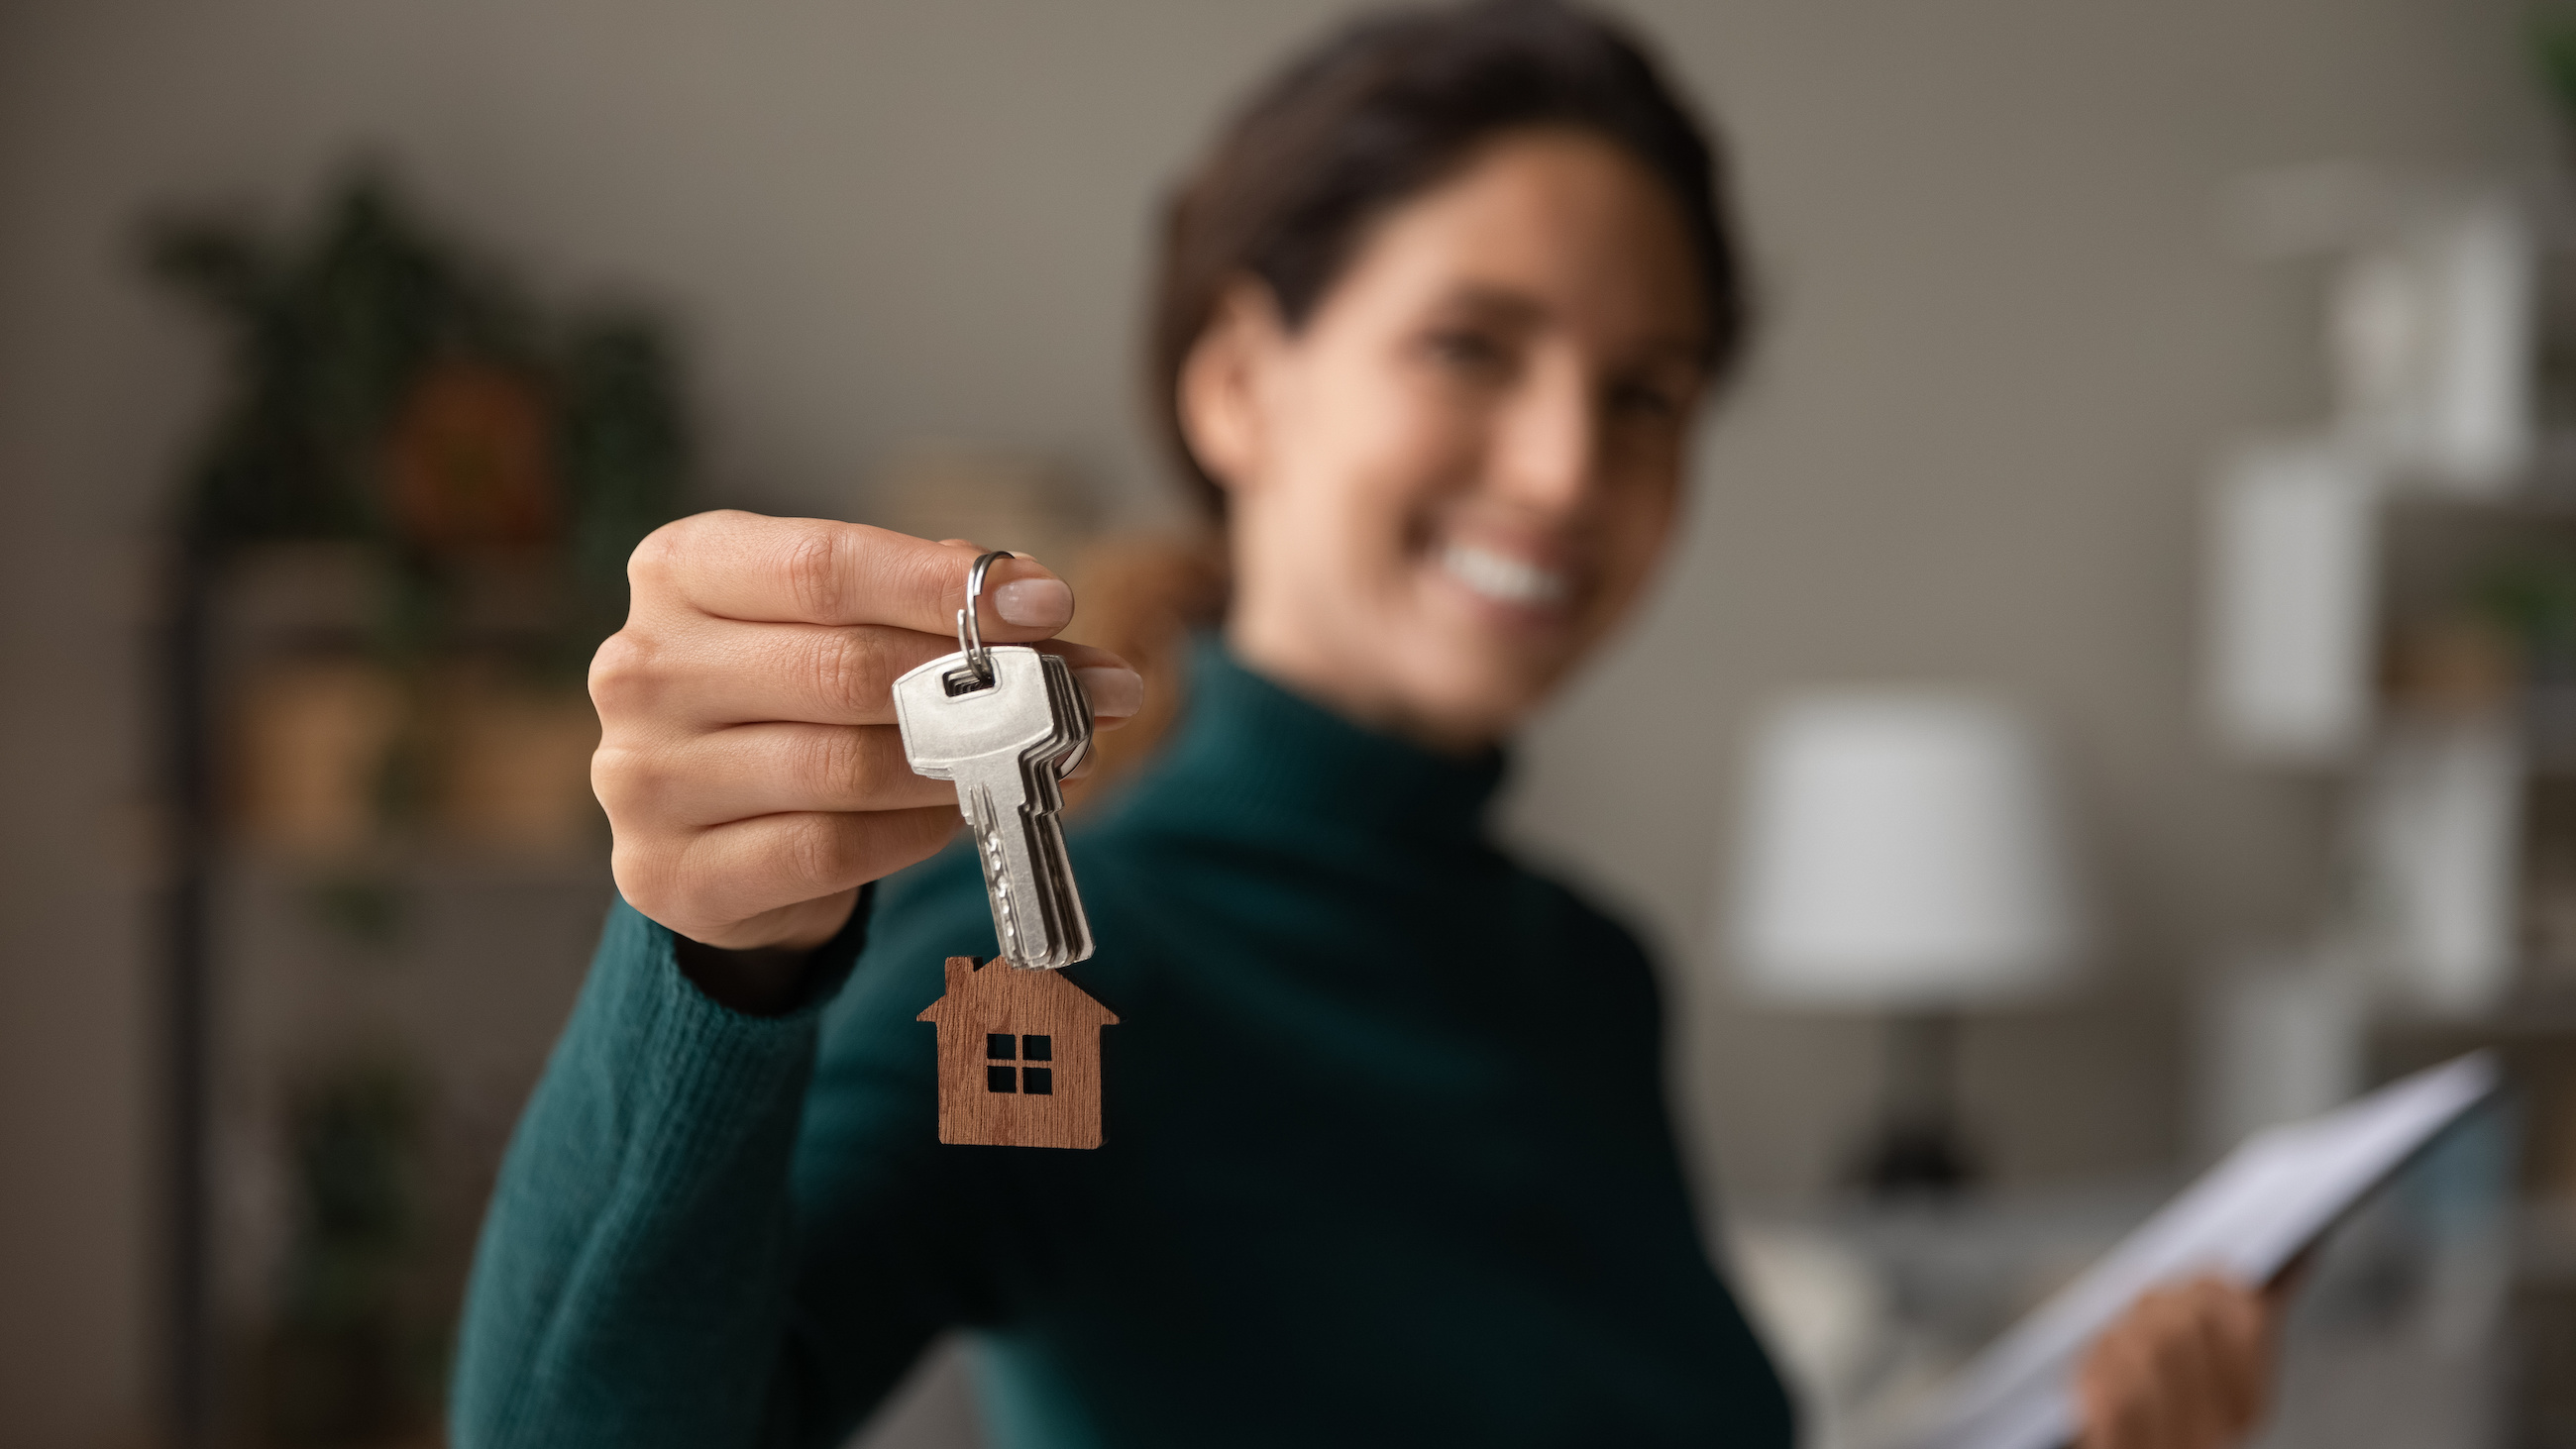 A woman holding keys with a house keychain